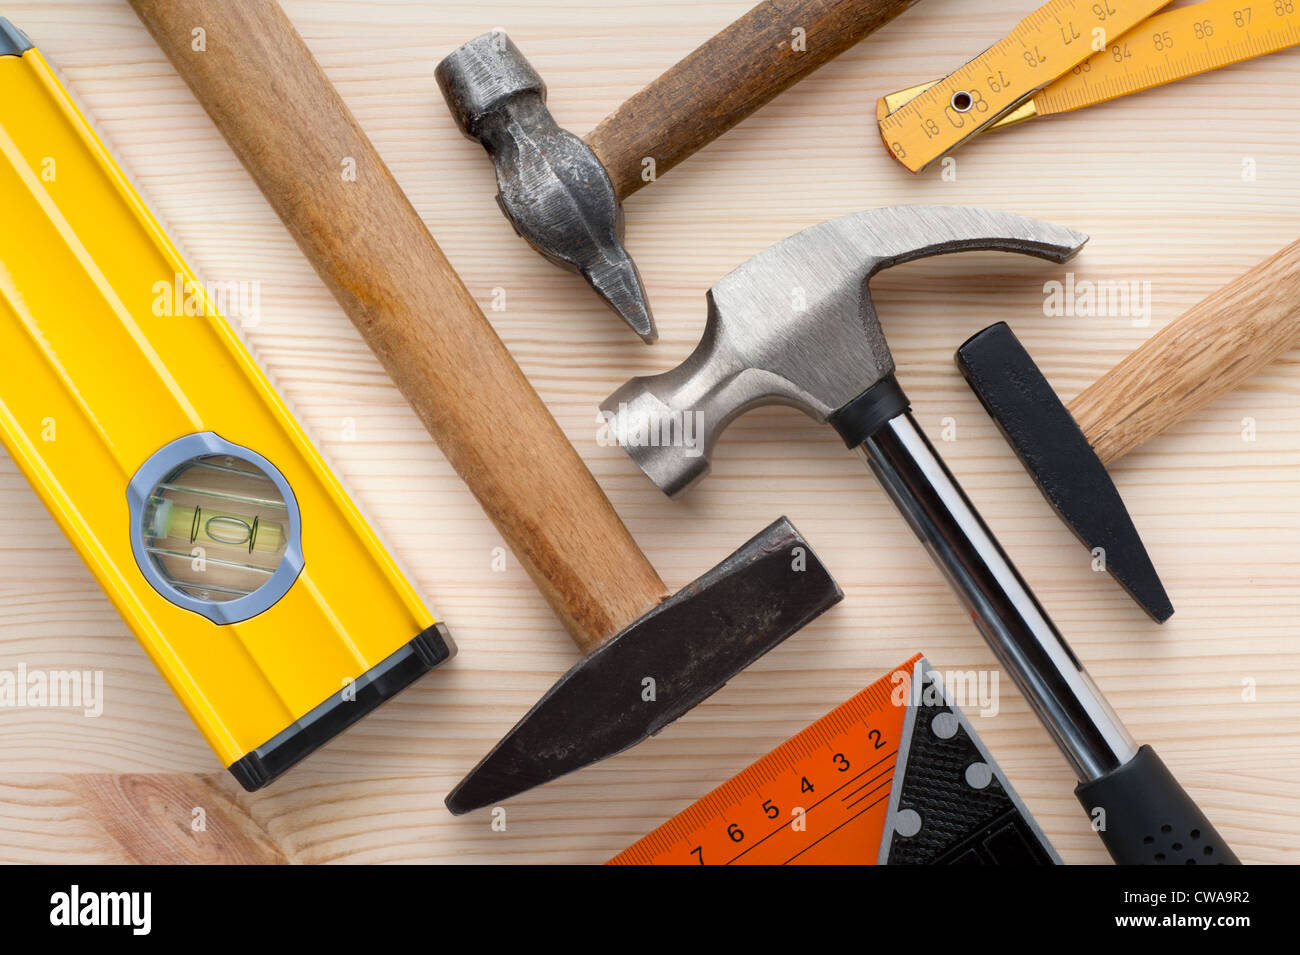 Assorted construction and measurement tools arranged on a wooden surface. Construction, repair or home improvement background. Stock Photo